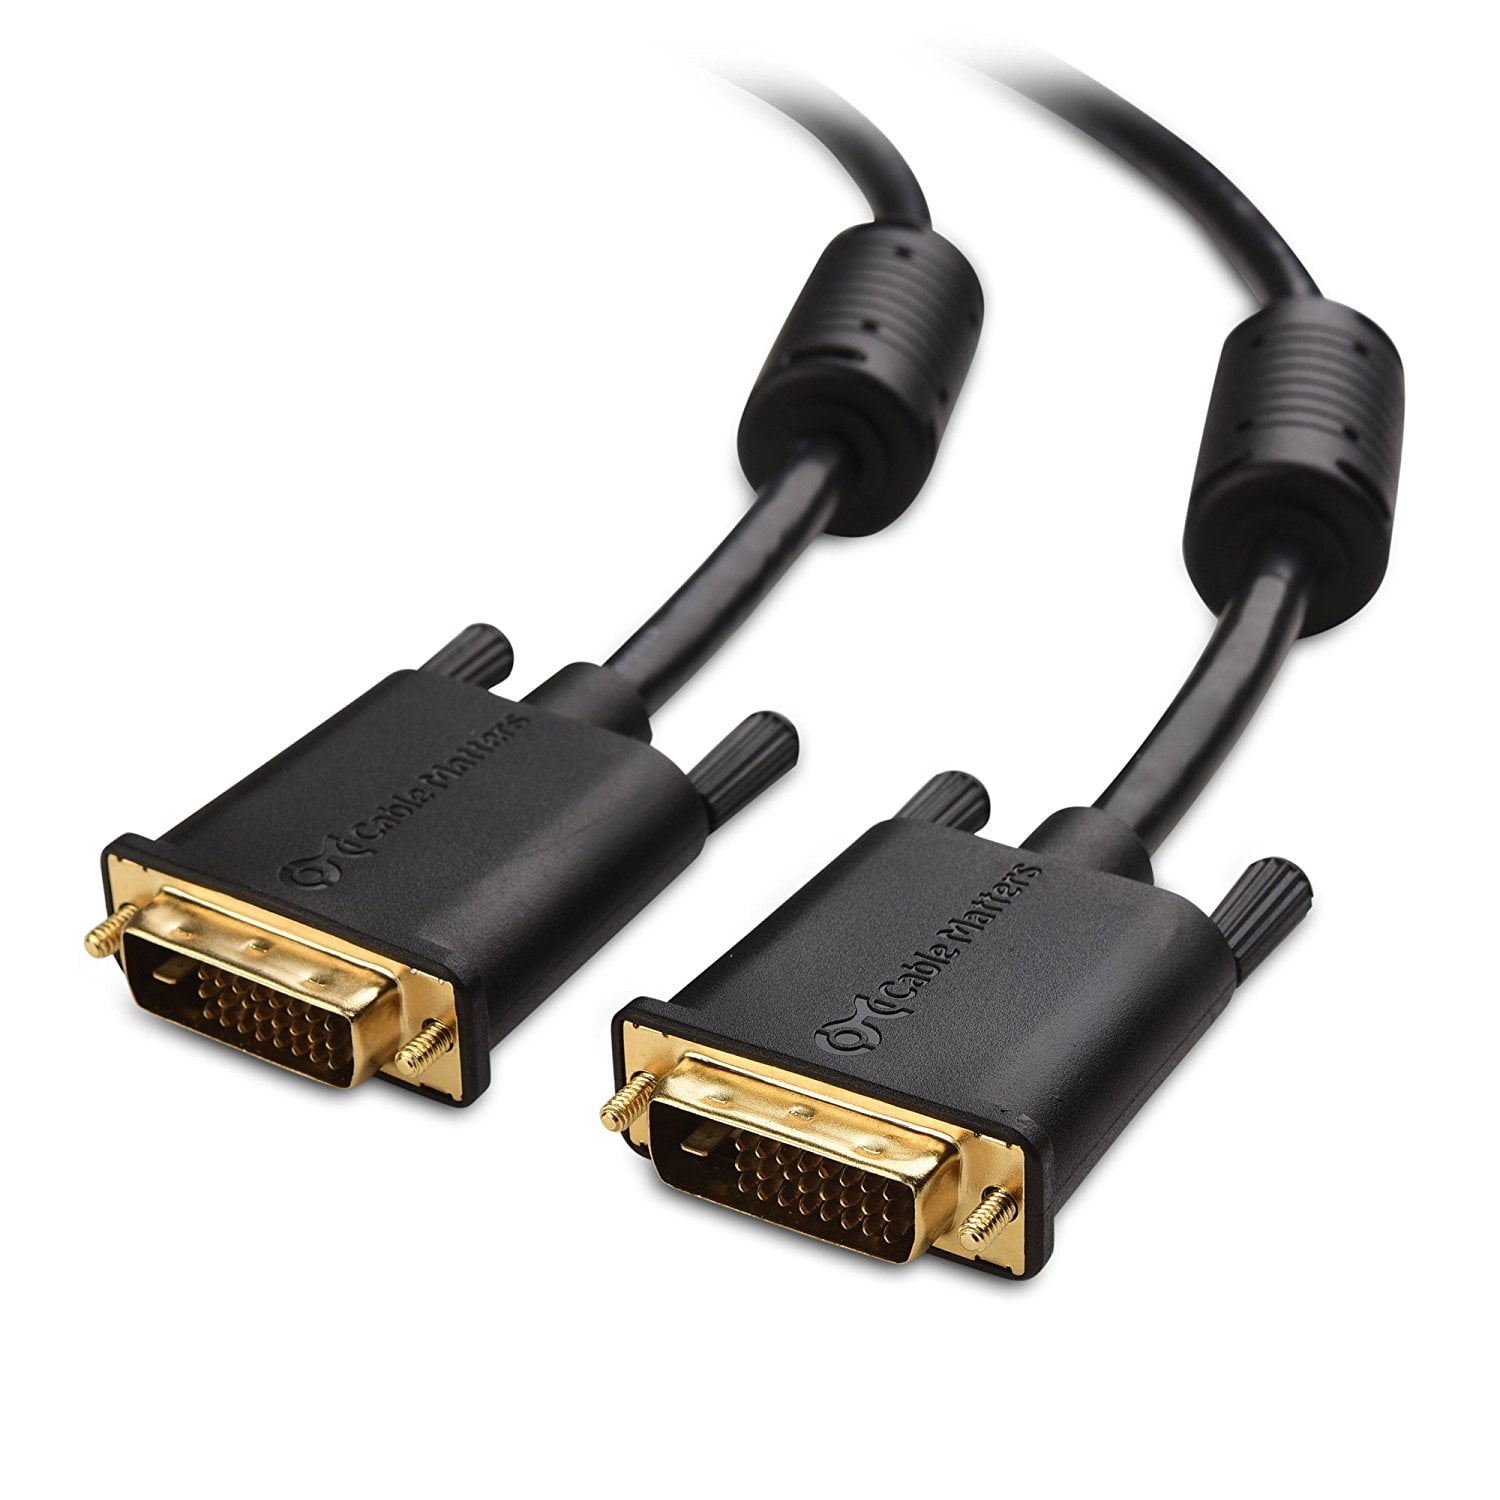 Gold Plated DisplayPort to DVI Cable 6 Feet Cable Matters 2-Pack 